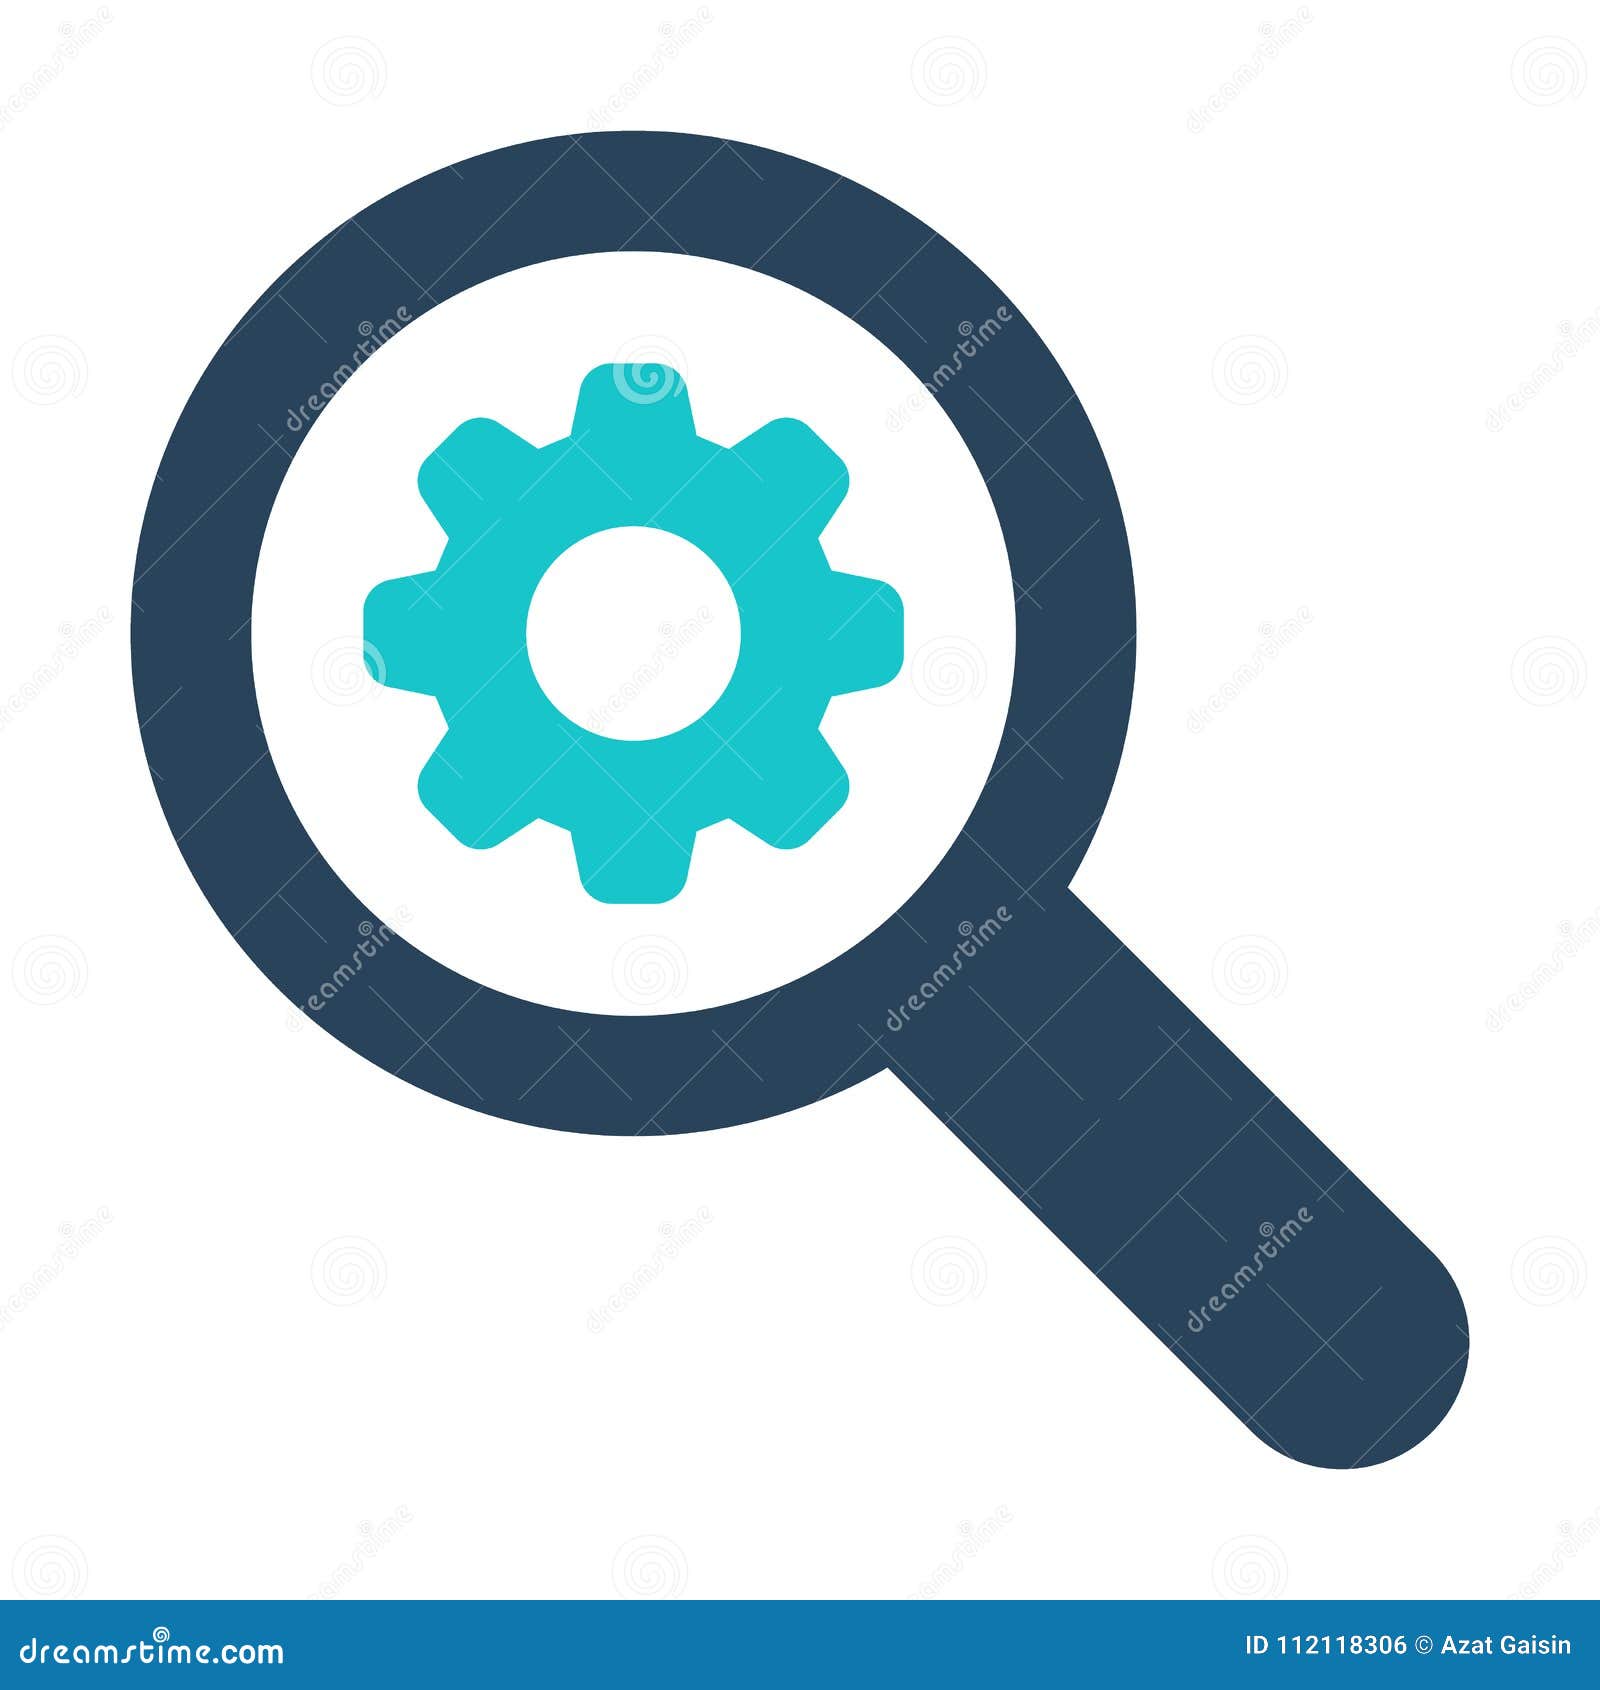 magnifying glass icon with settings sign. magnifying glass icon and customize, setup, manage, process 